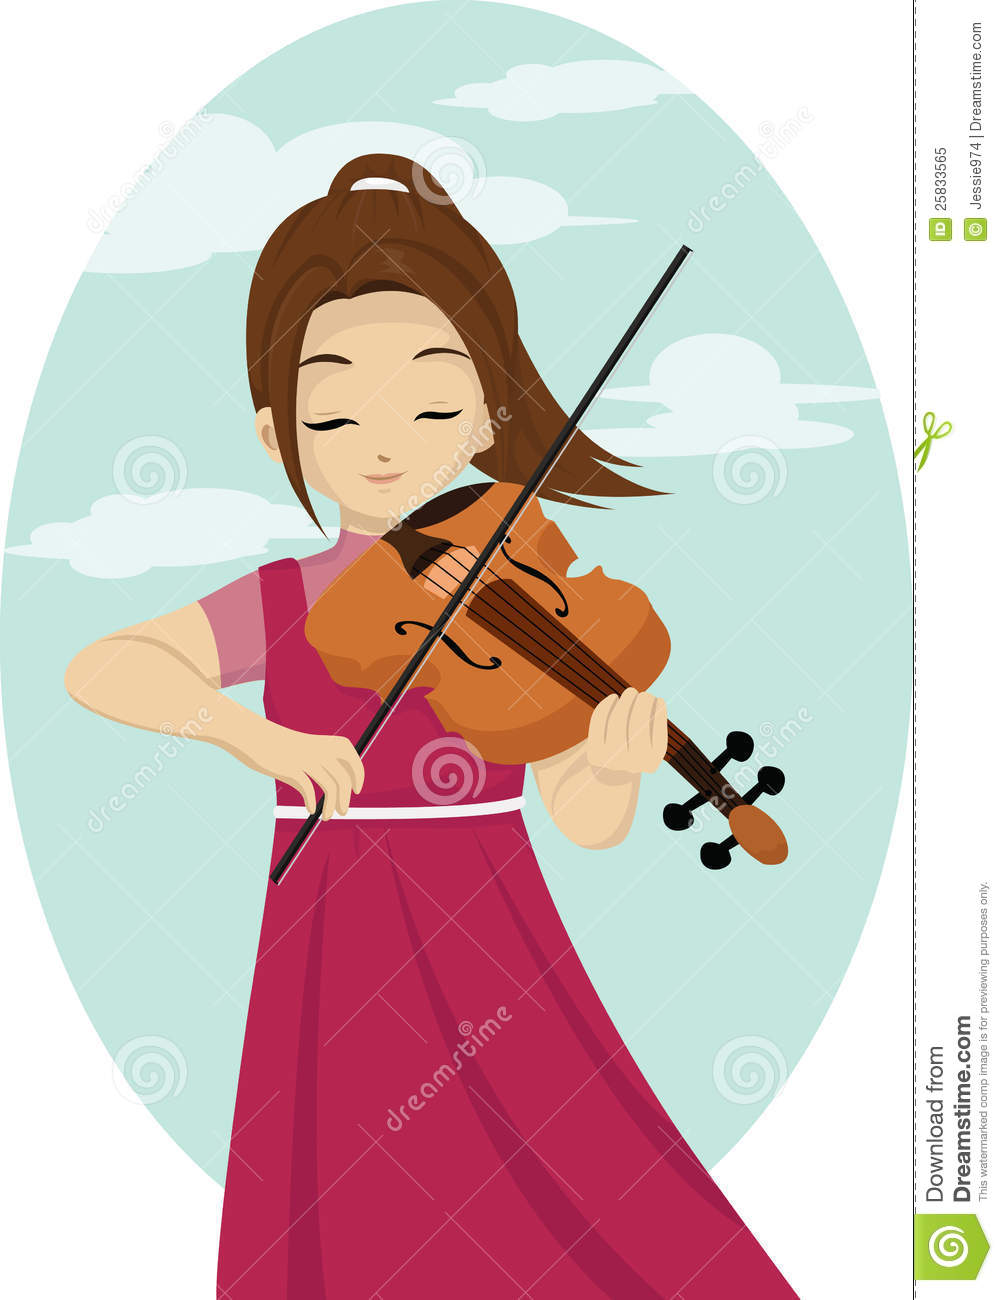 Playing the violin clipart clipartfest